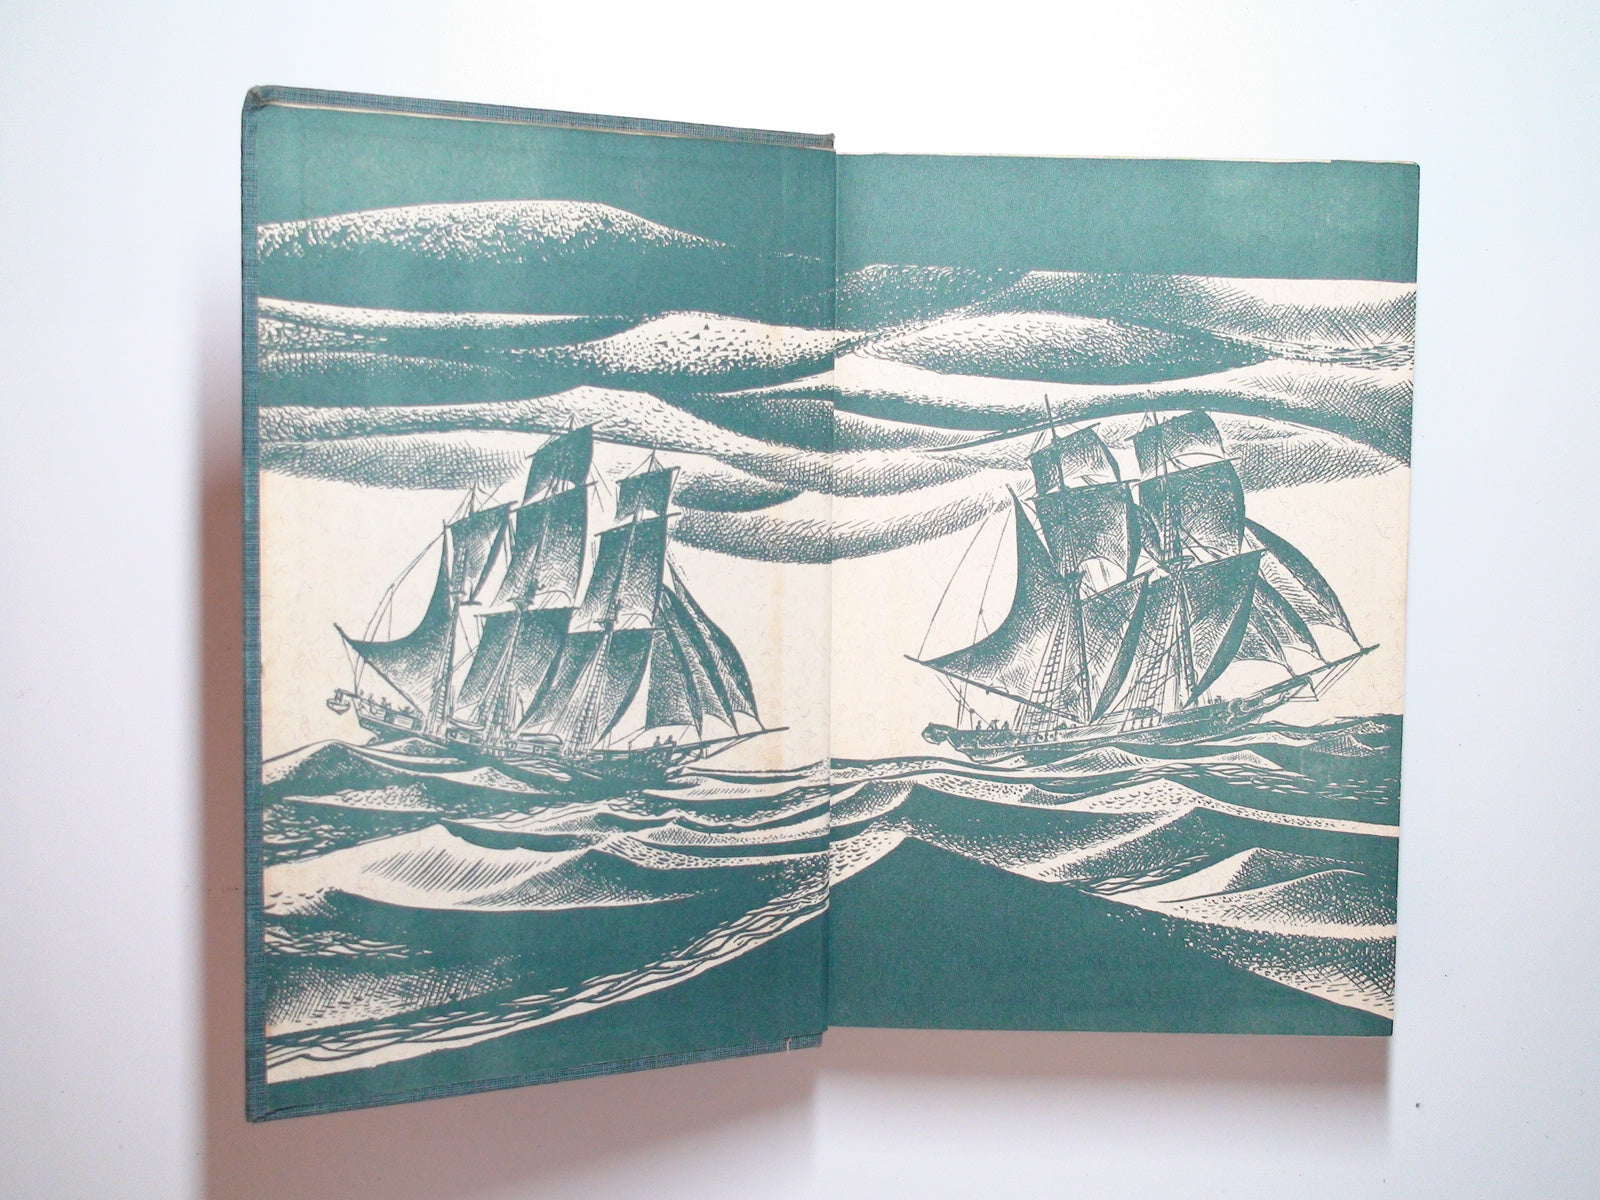 Pirate Waters by Edwin L. Sabin, Illustrated by Lynd Ward, 1st Ed, 1941